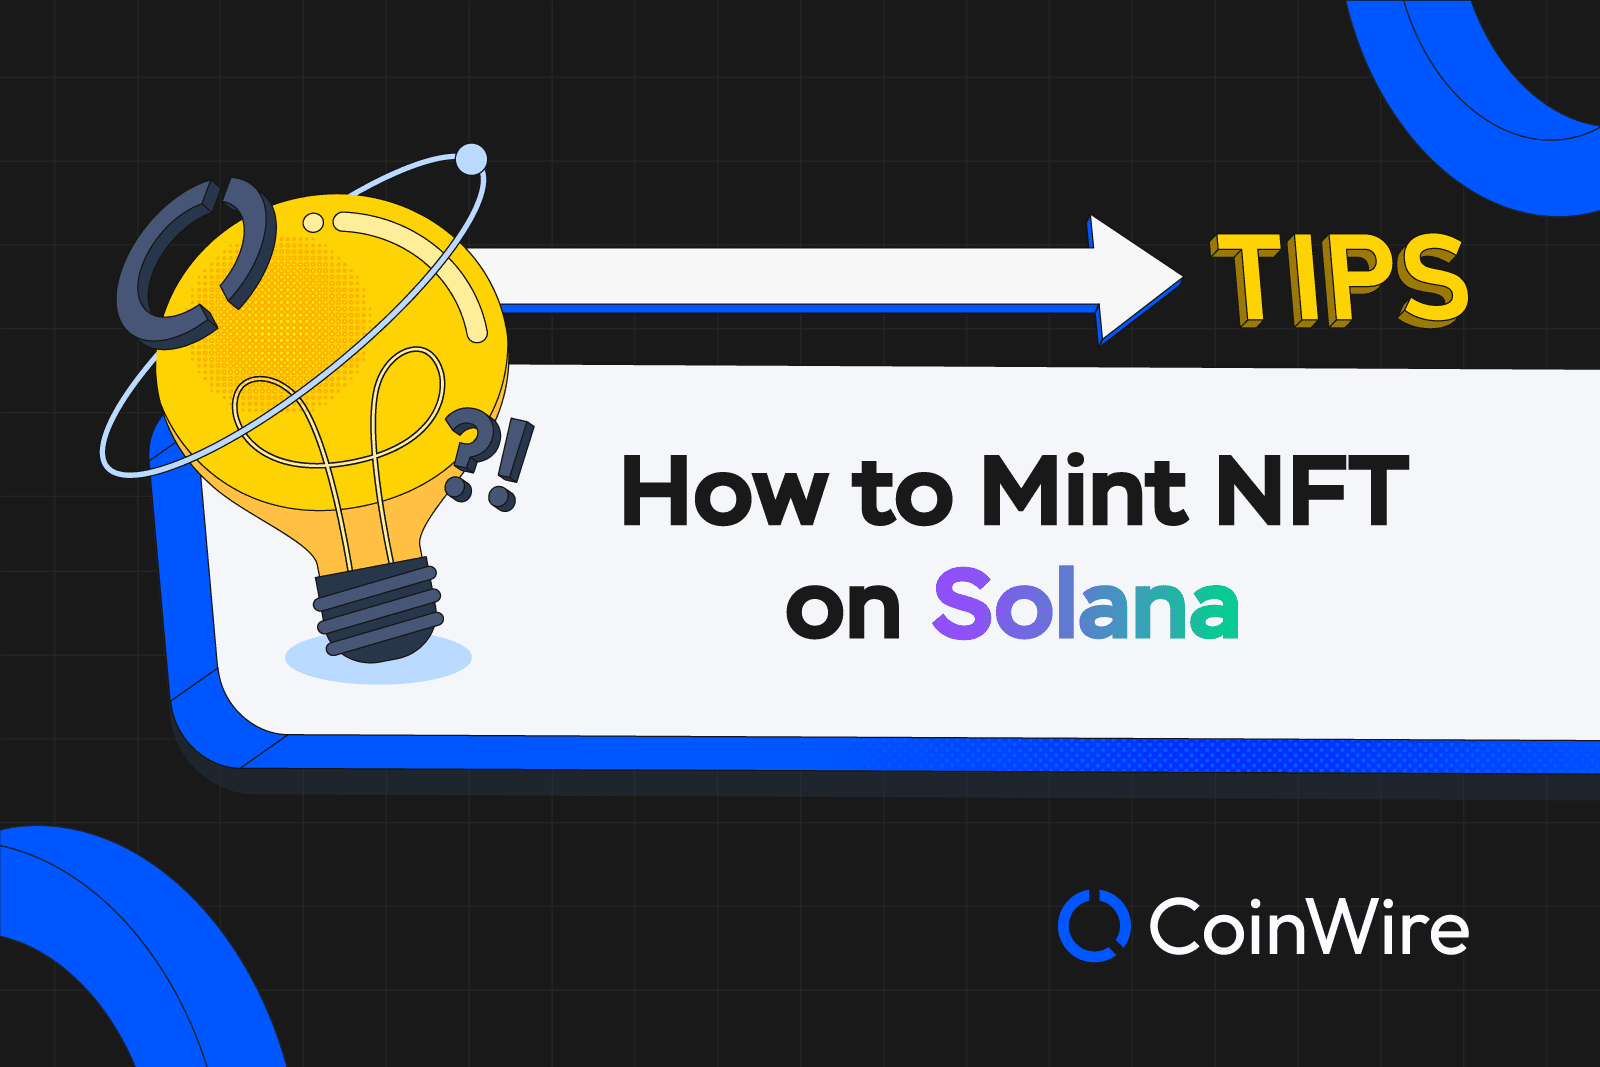 How To Mint Nfton Solana Featured Image